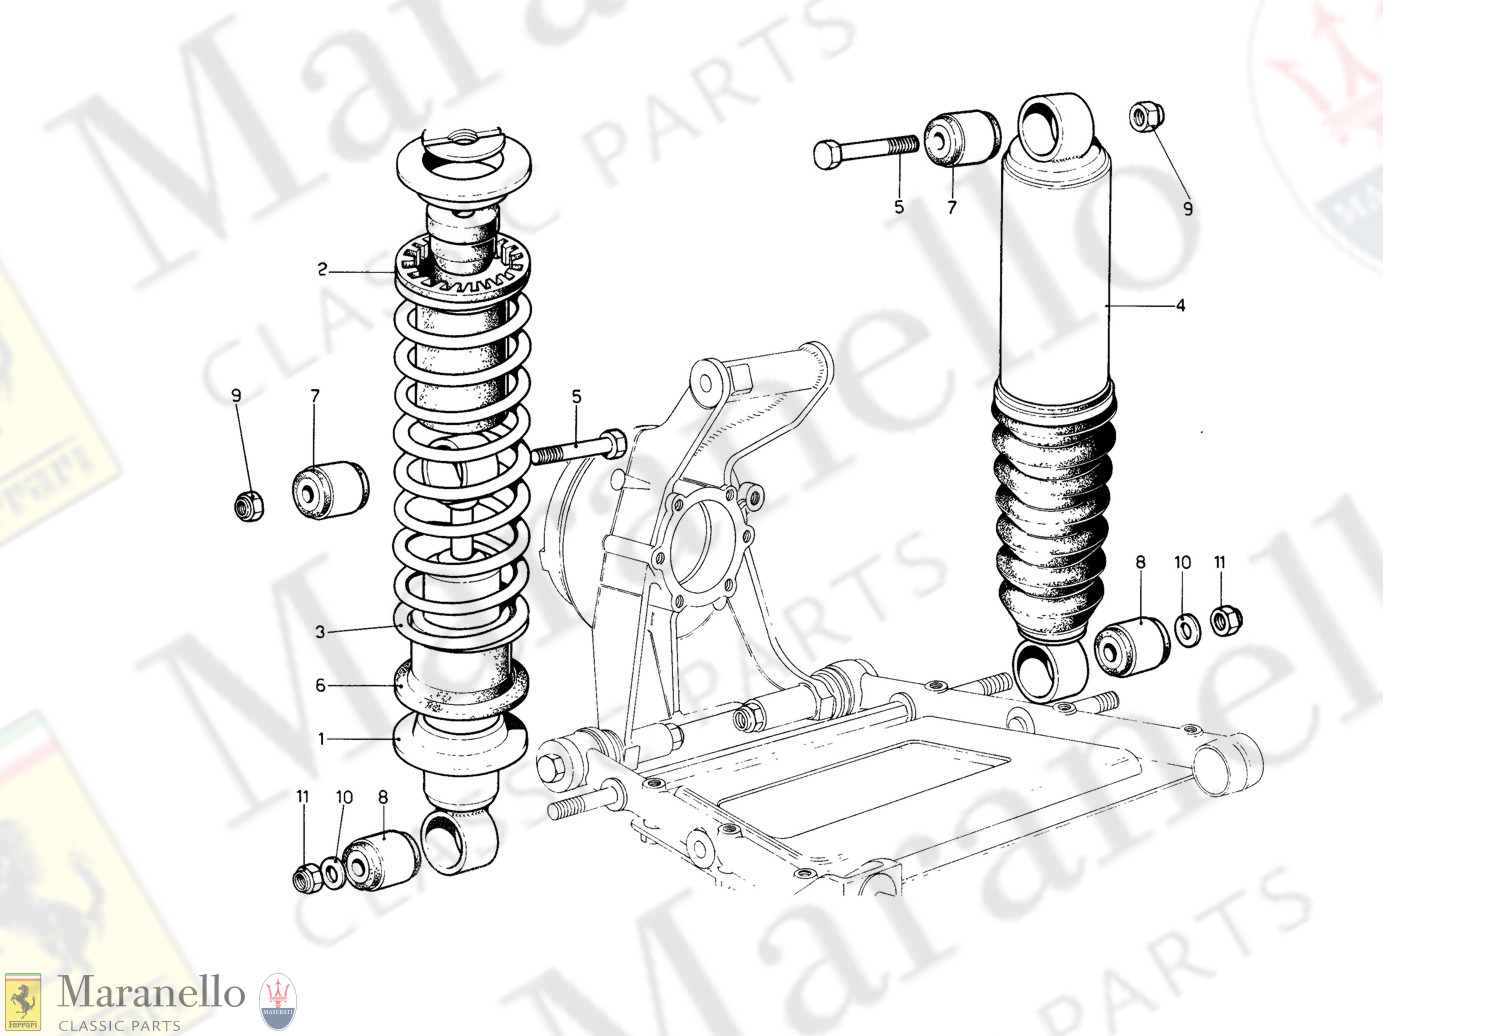 046 - Rear Suspension - Shock Absorber And Self-Leveling